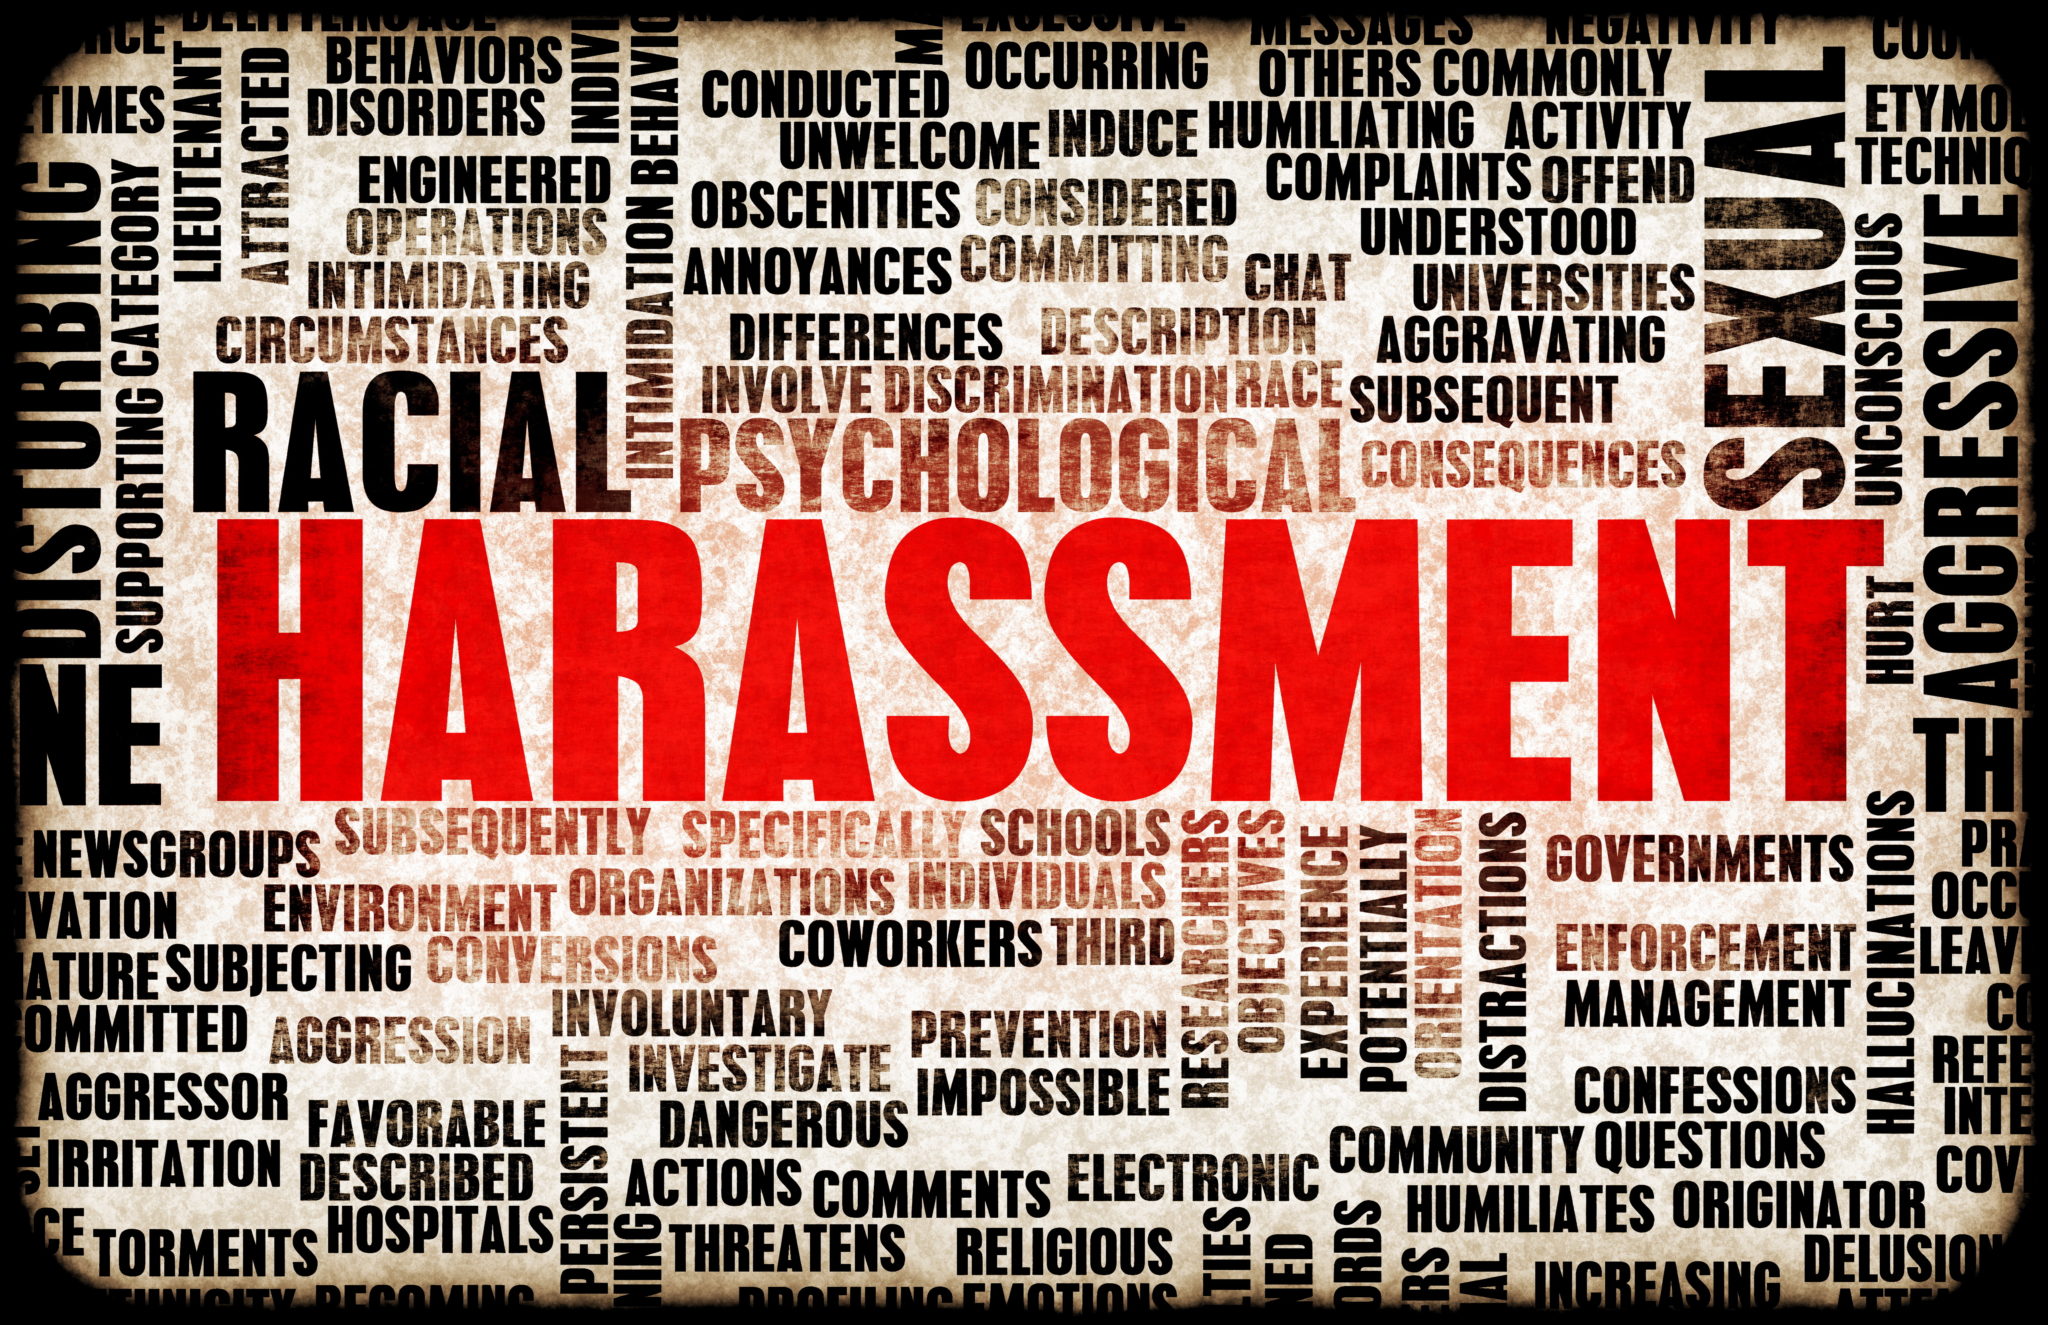 [:es]Harassment should count as scientific misconduct[:]